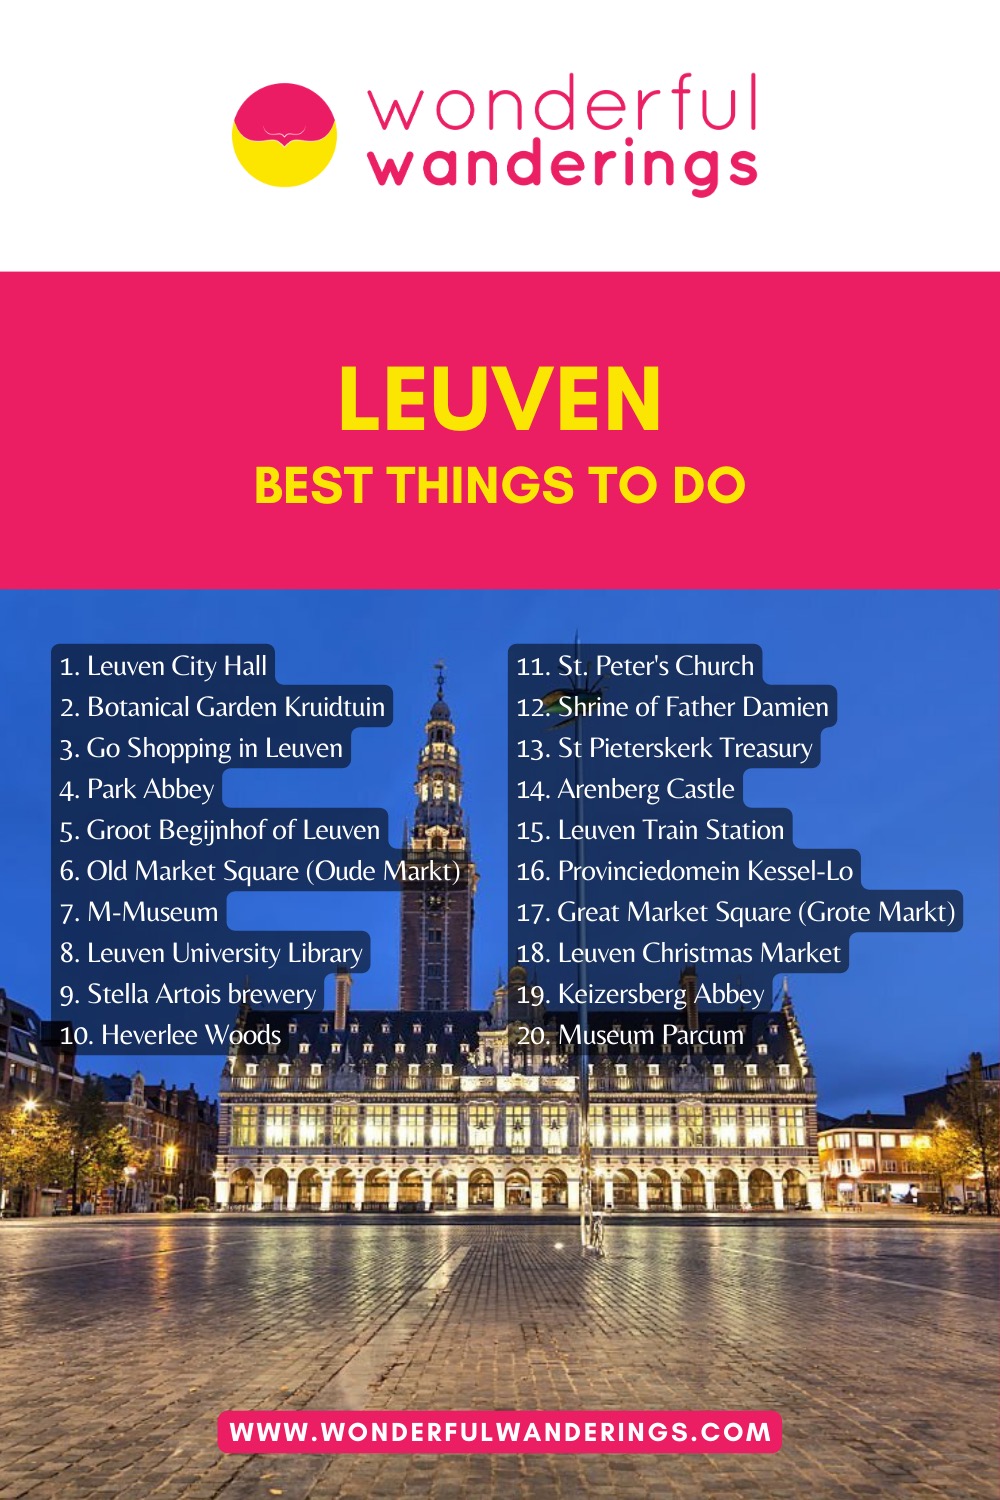 Things to do in Leuven